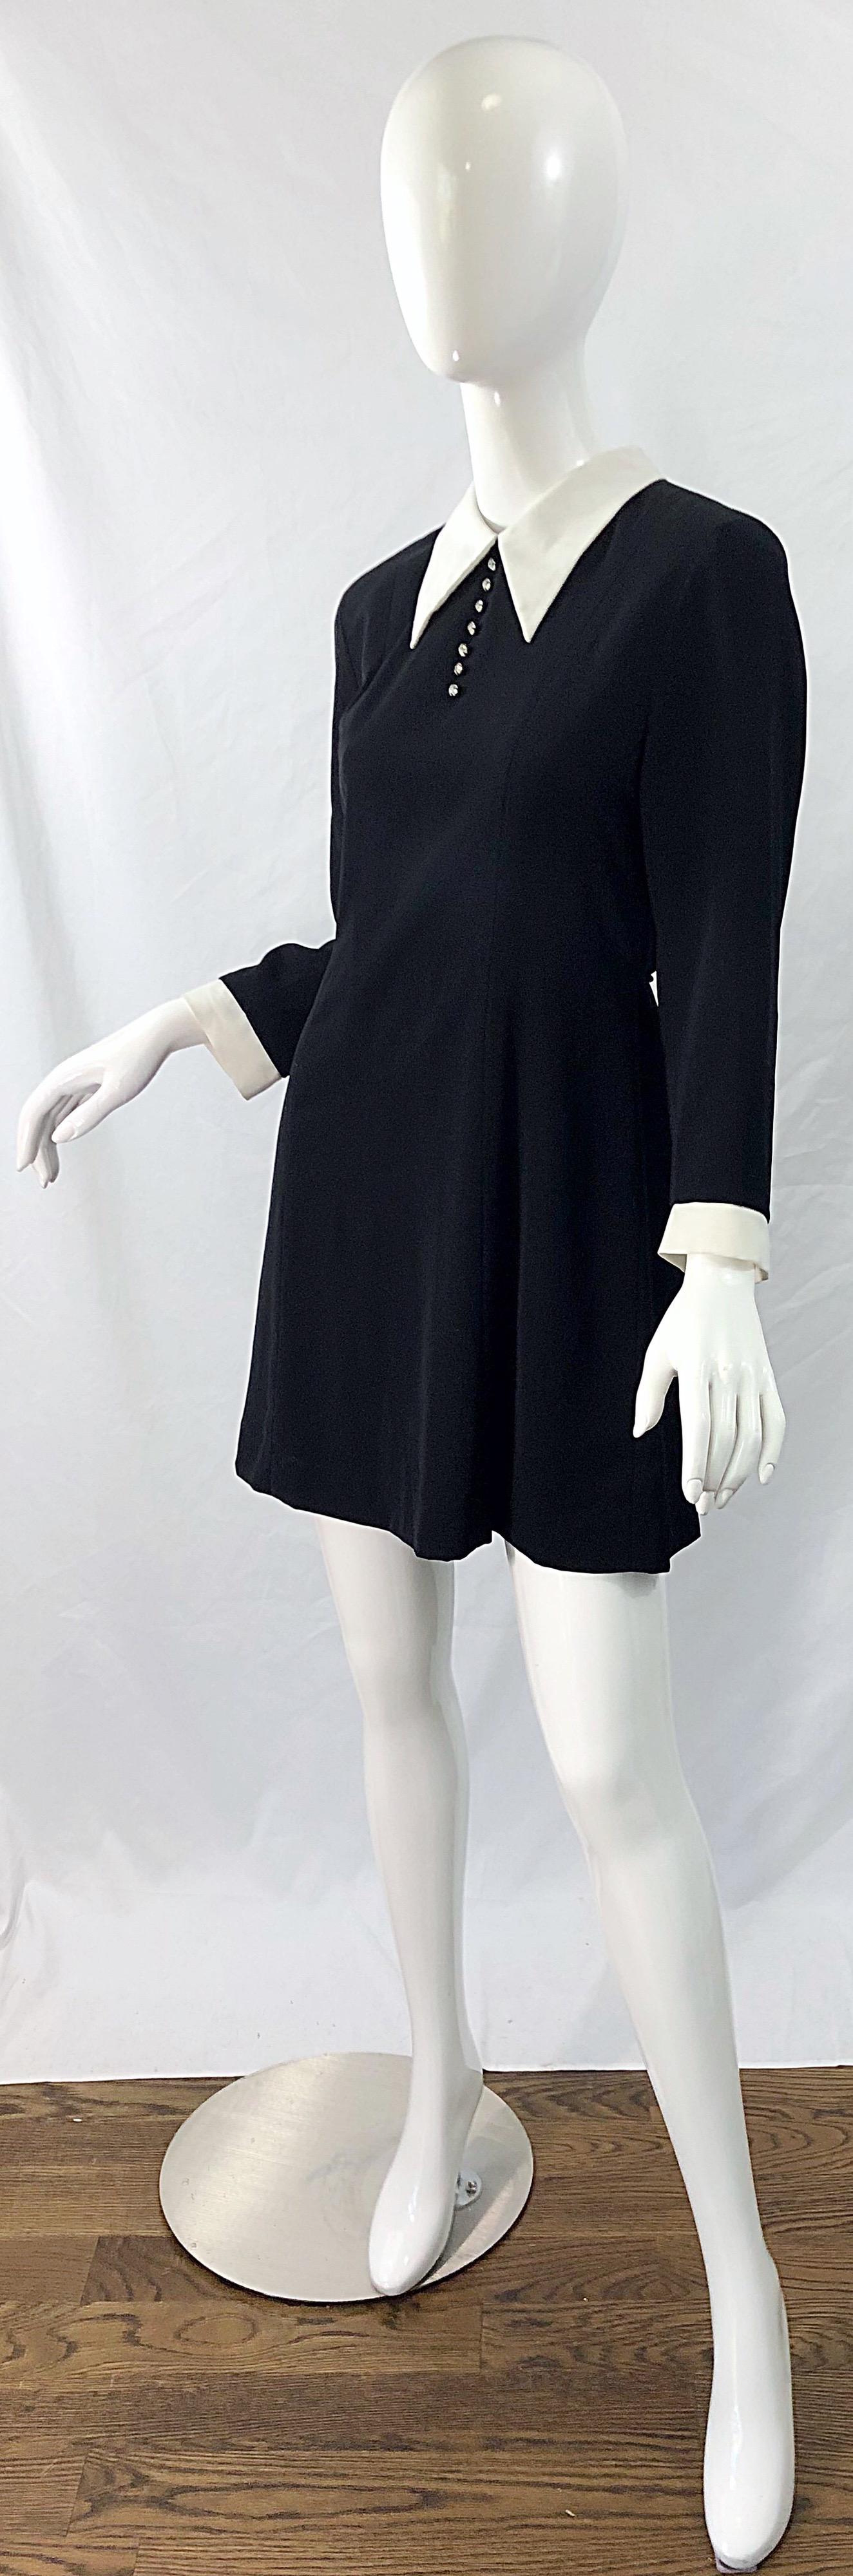 Vintage Givenchy 1990s Black and White Rhinestone Long Sleeve 90s Mini Dress In Excellent Condition For Sale In San Diego, CA